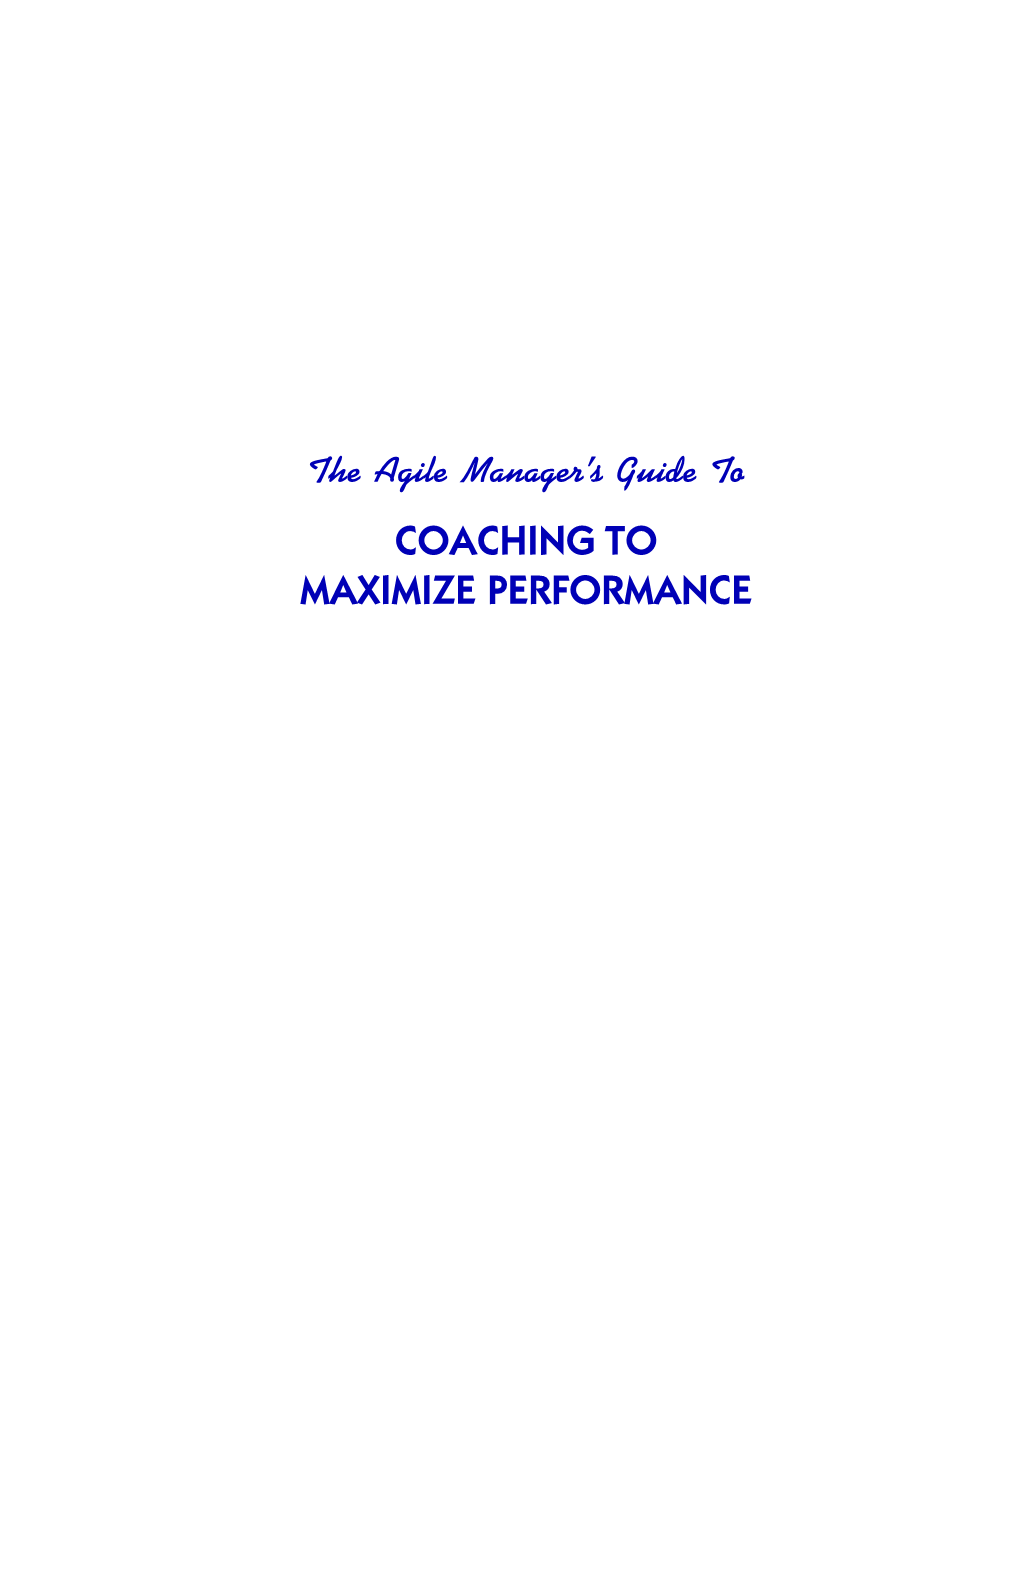 The Agile Manager's Guide to Coaching to Maximize Performance